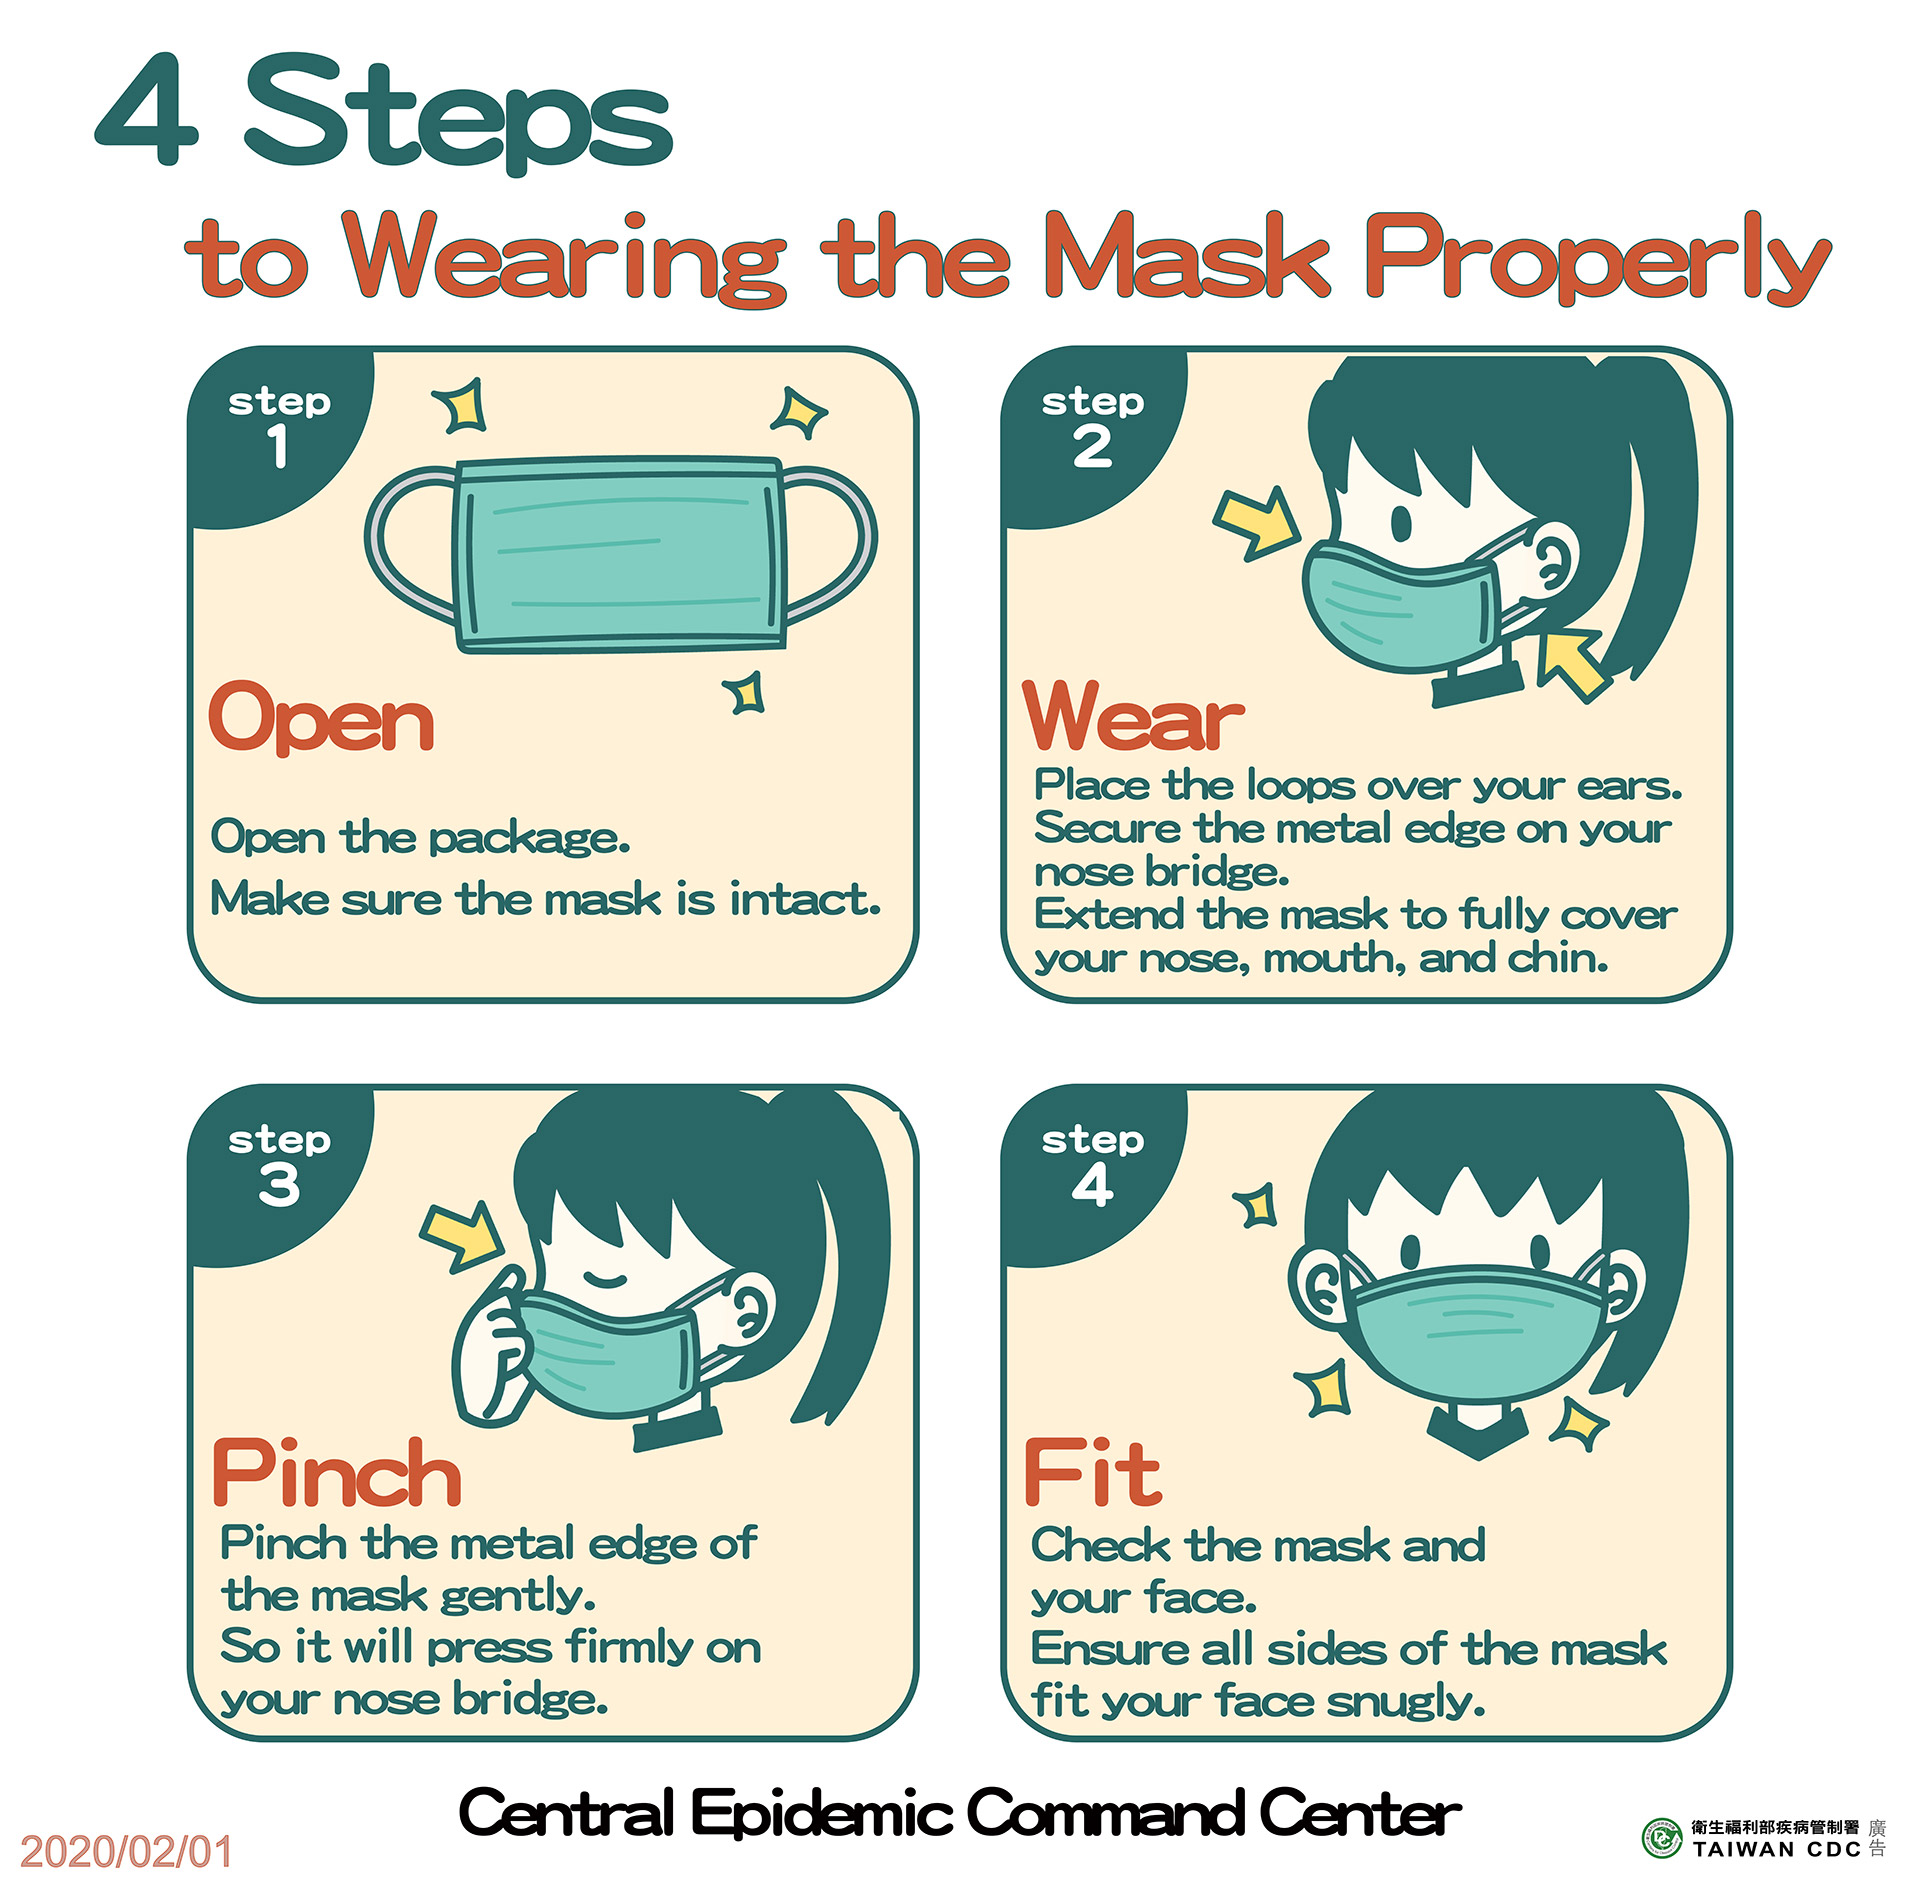 4 Steps to Wearing the Mask Properly